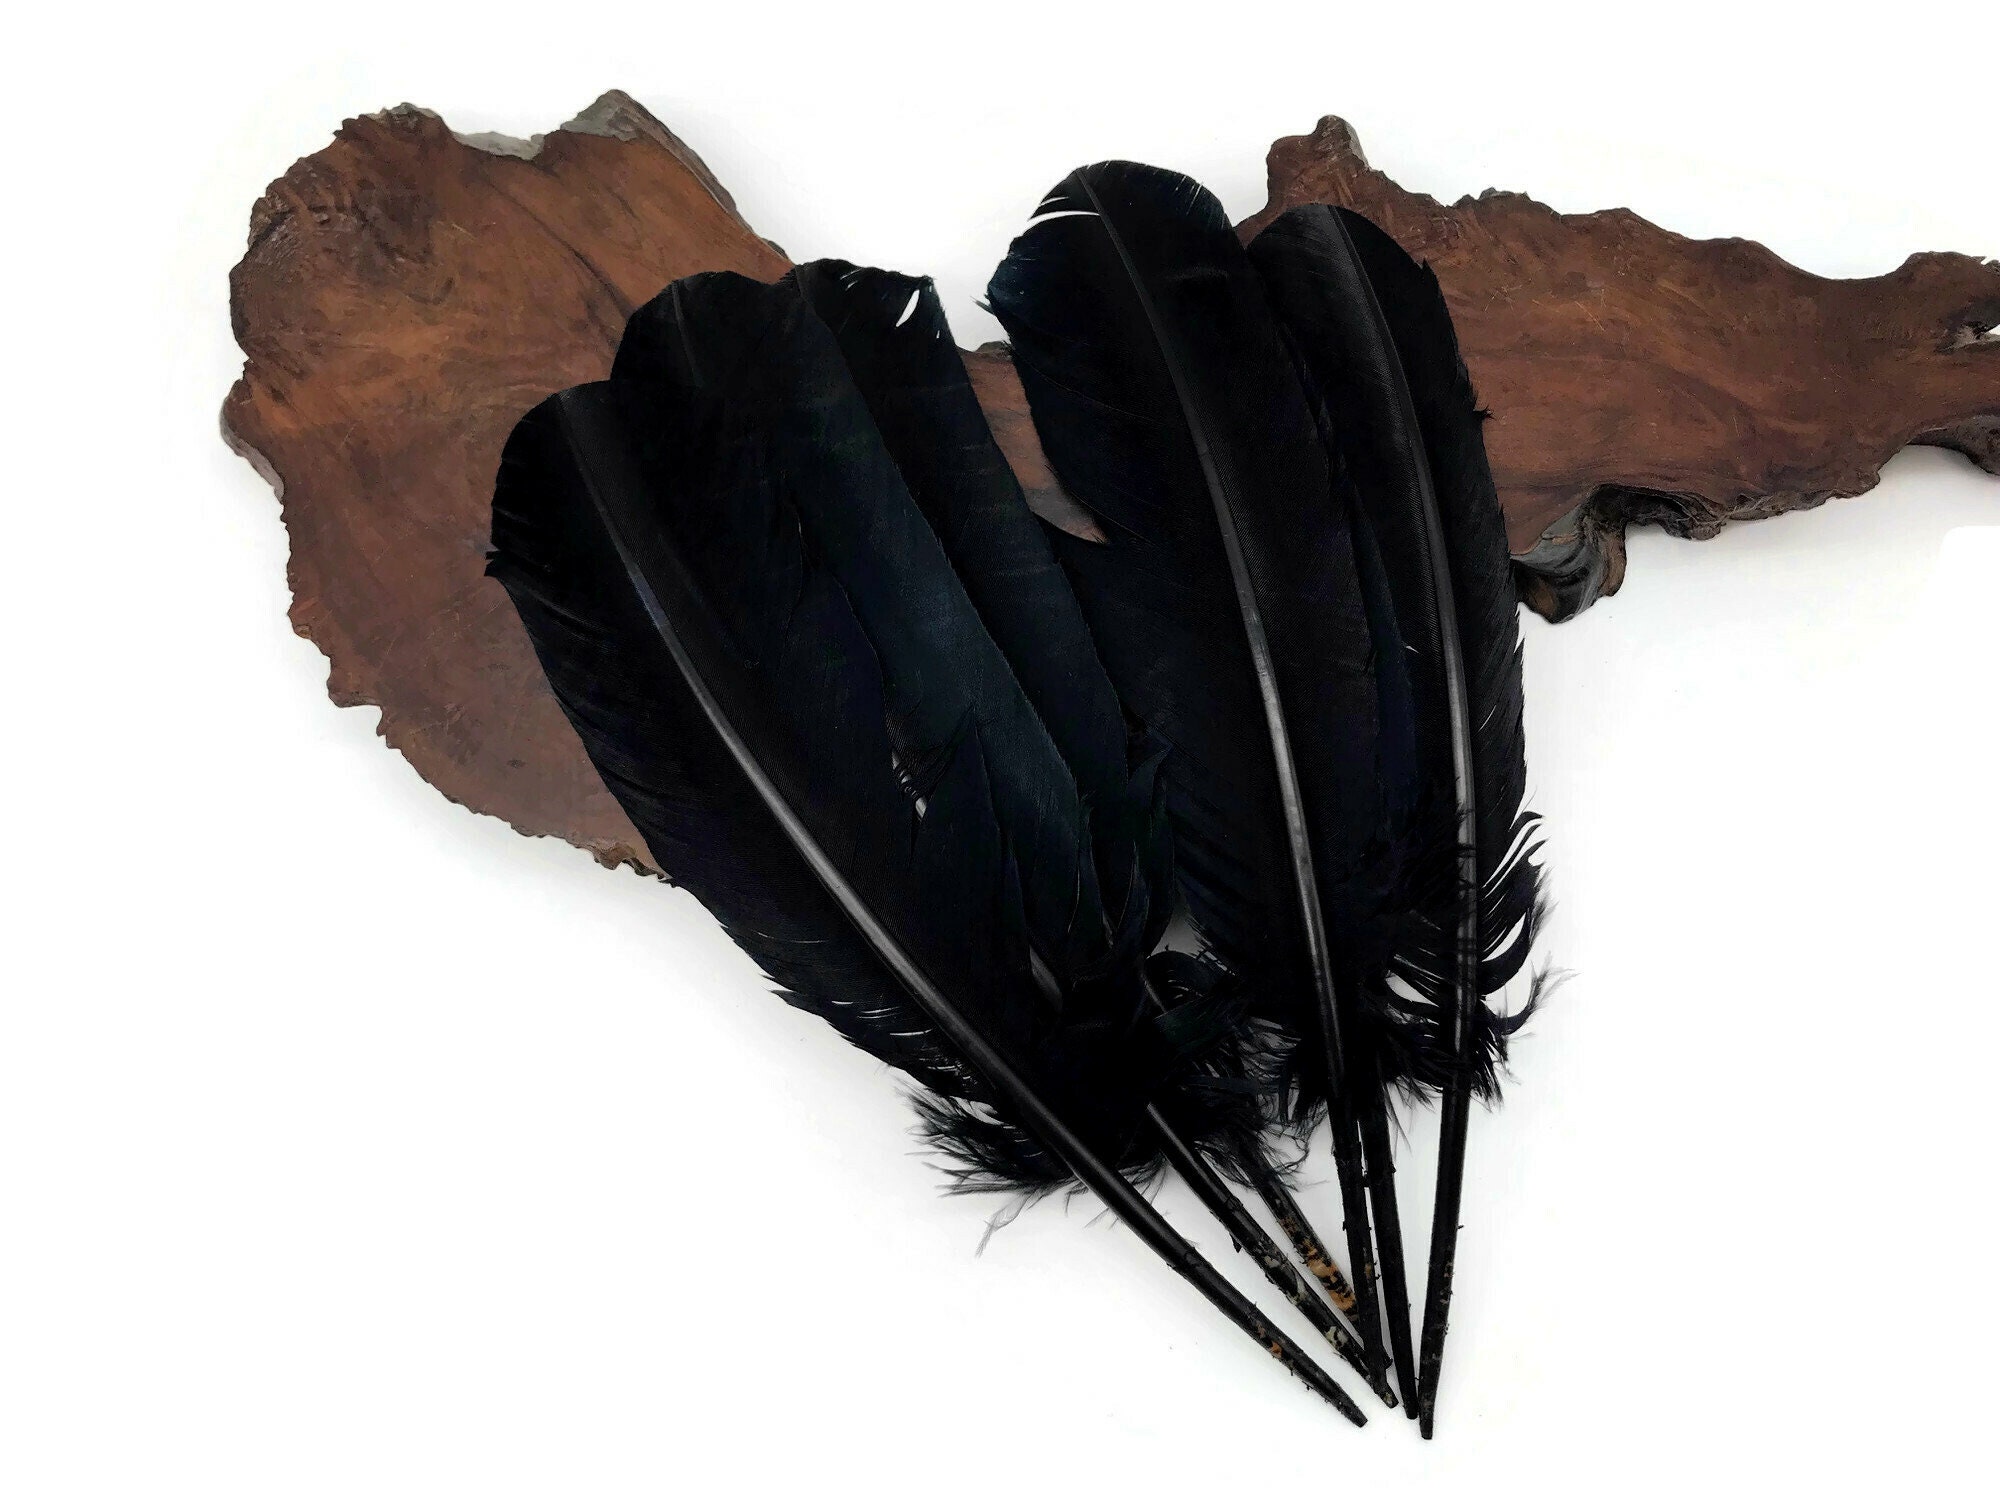 Black Quill Feathers by the Pound